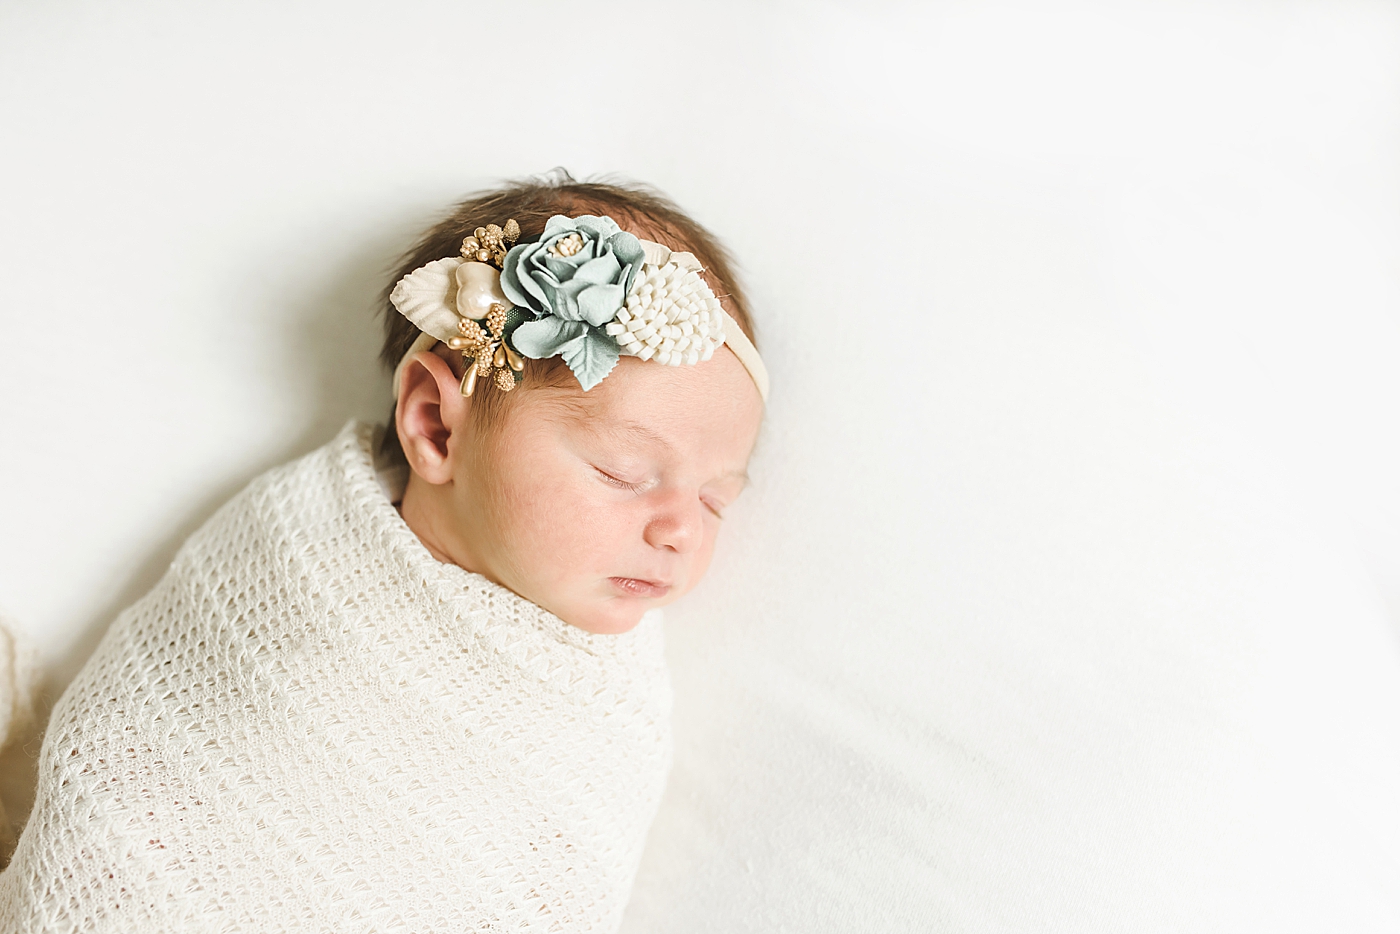 Newborn baby girl with bow asleep | Photo by Anna Wisjo Photography